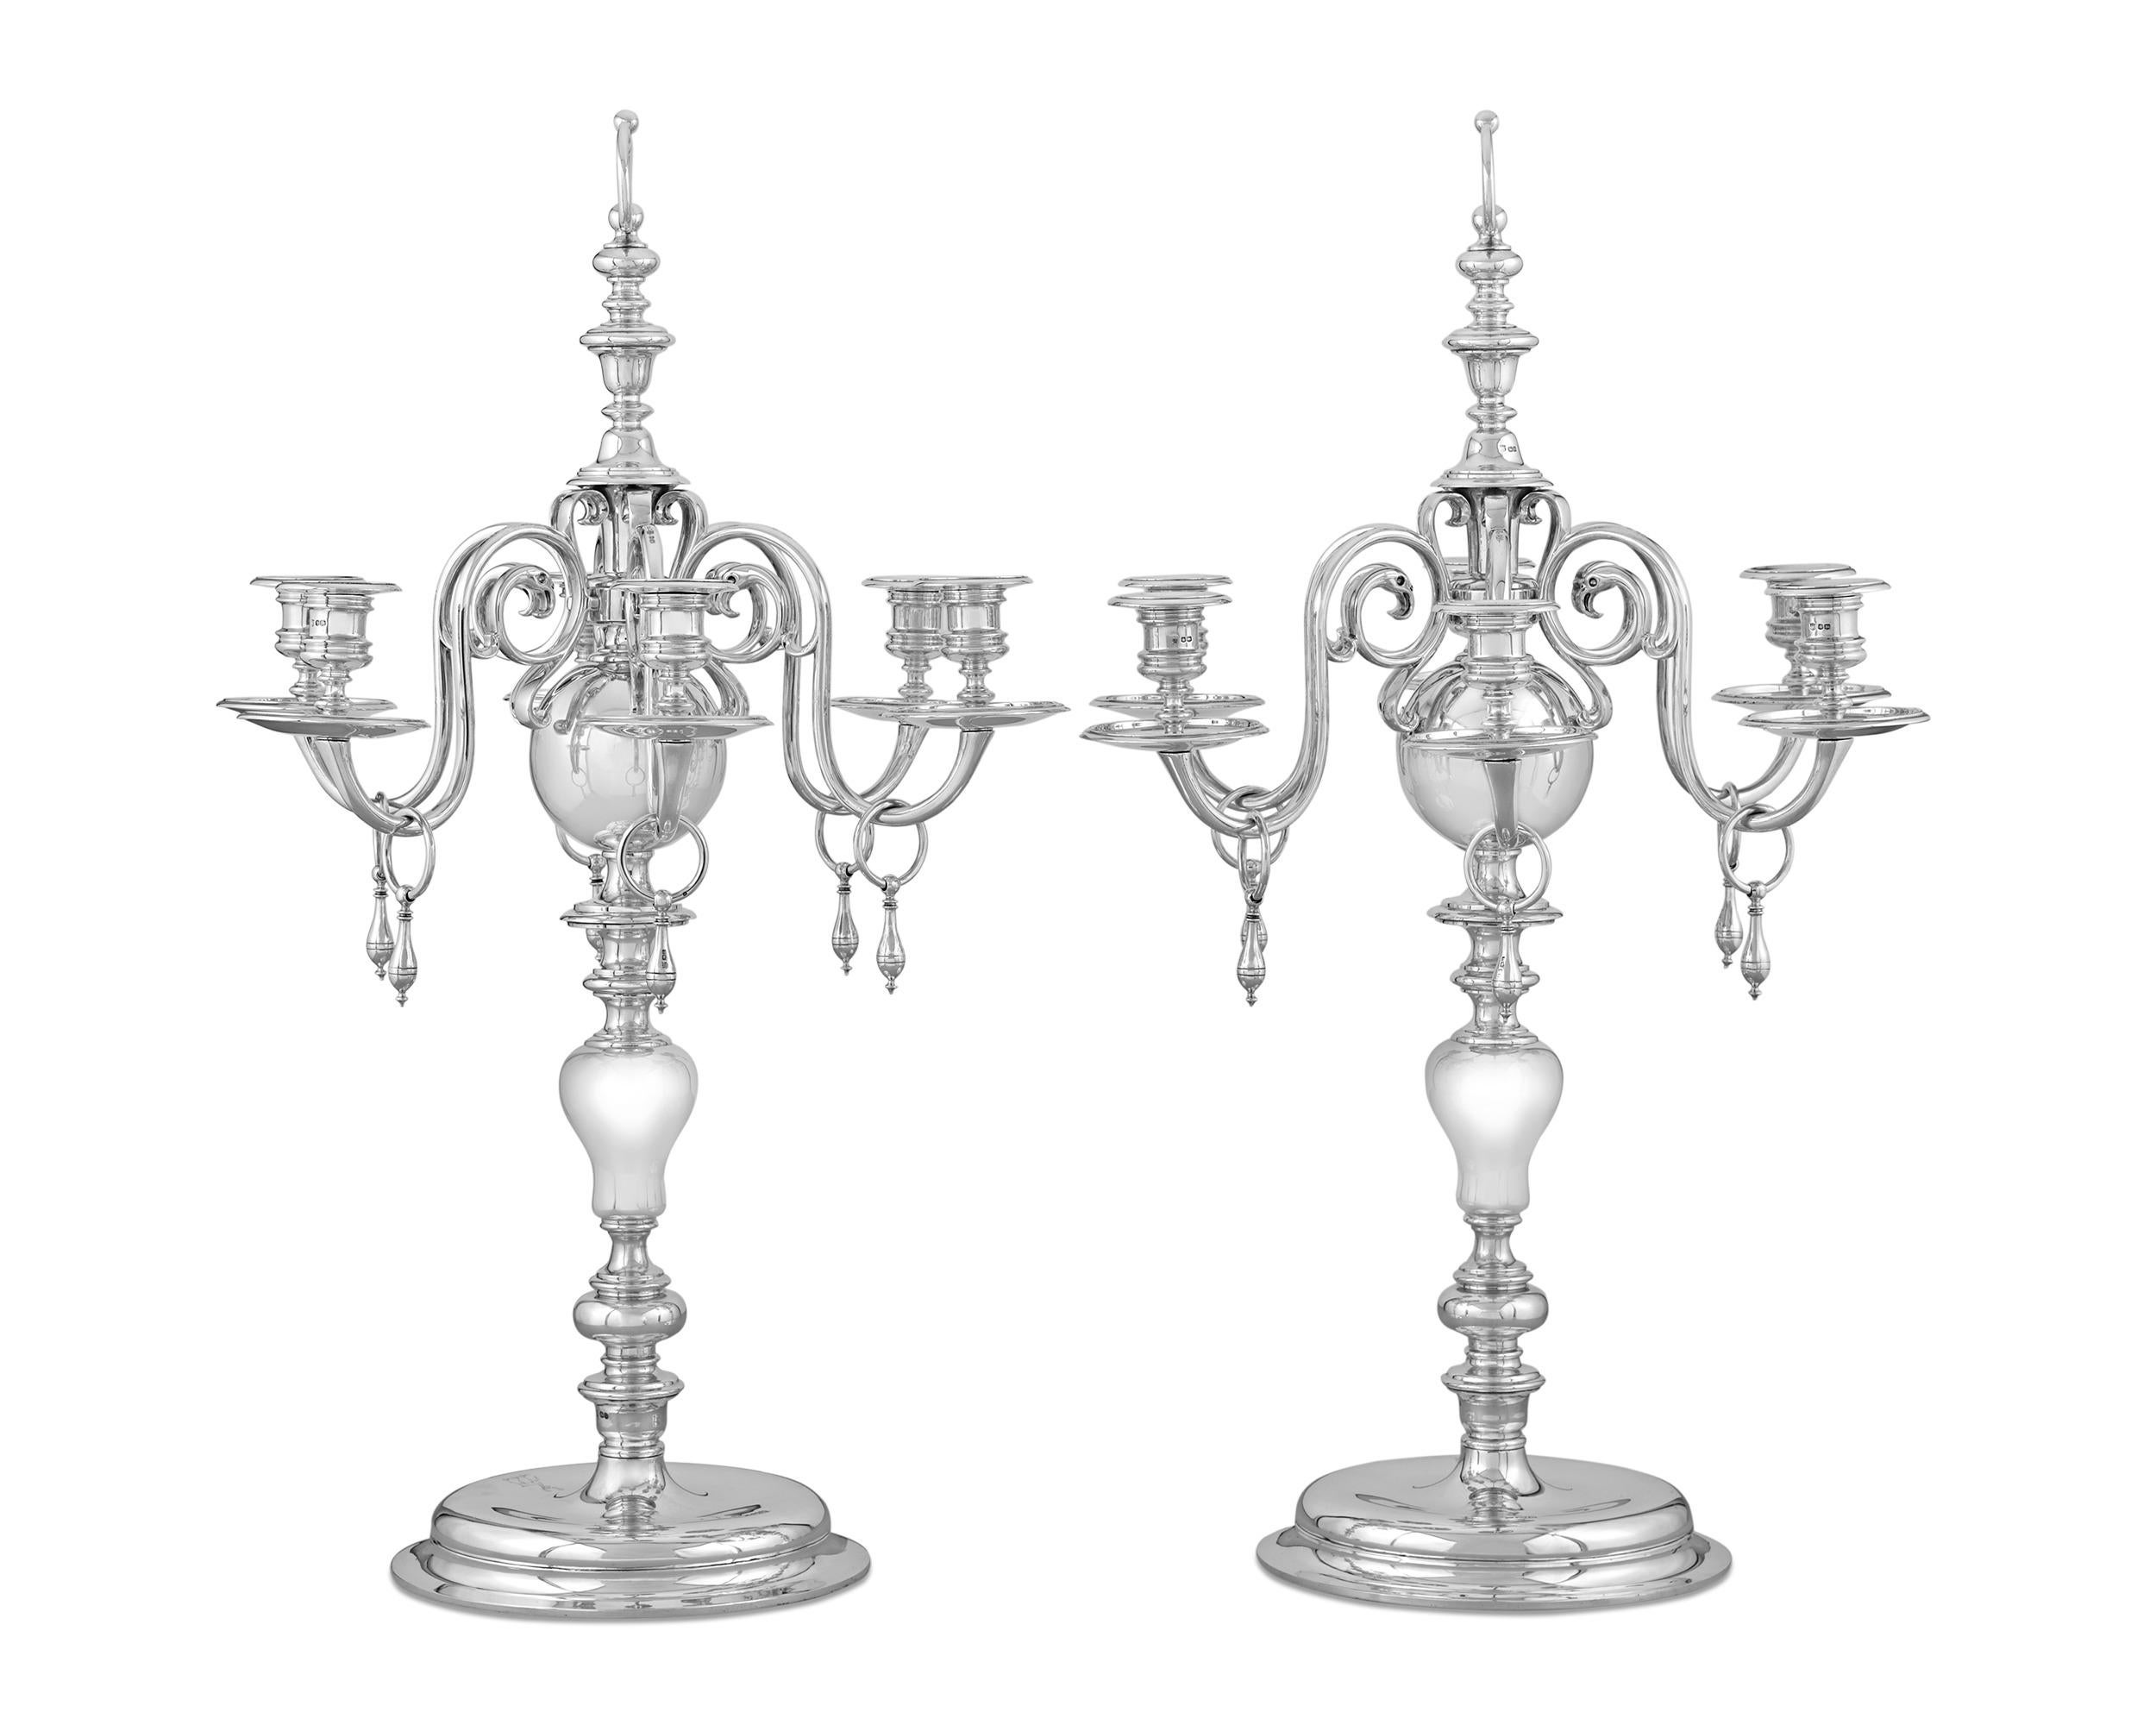 This important set of George V silver candelabra by famed English silversmiths Thomas Bradbury & Sons are some of the finest the firm ever created. A high level of refinement is imparted into this weighty six-light design. Based on the early